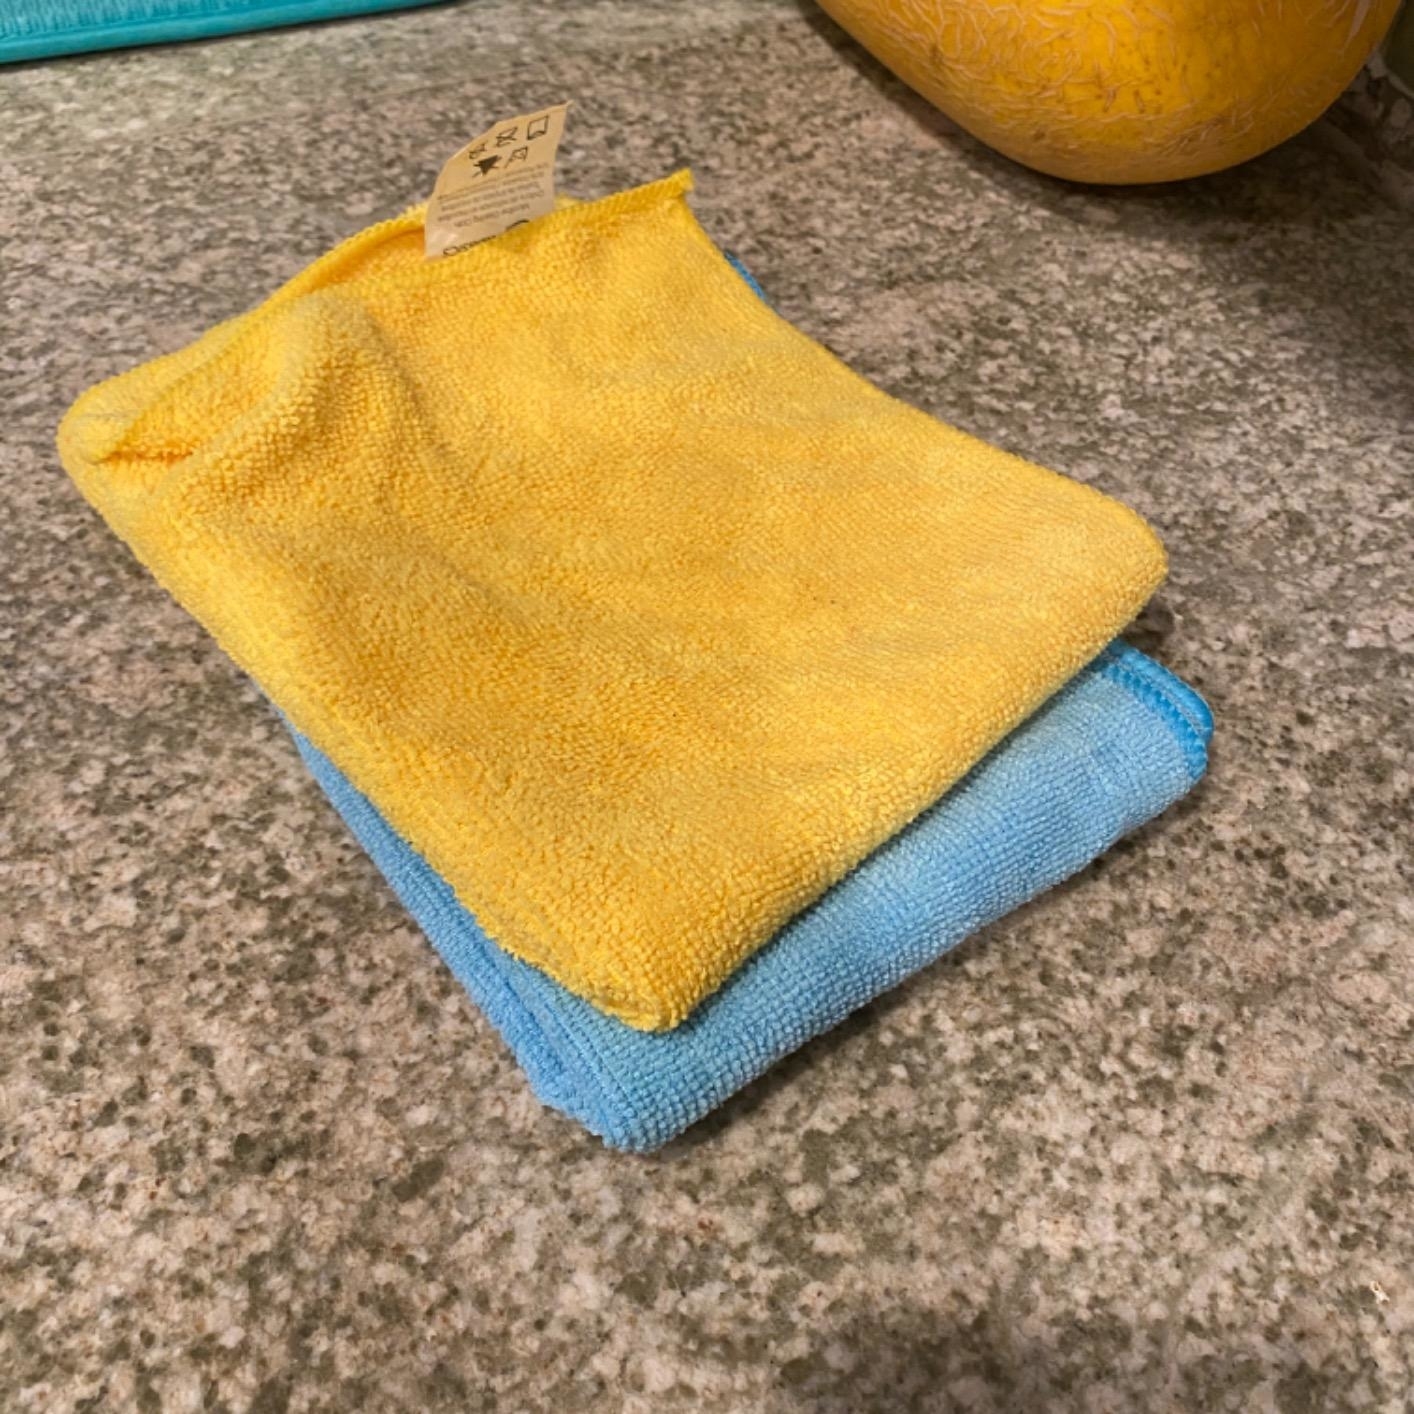 Reviewer image of the blue and yellow microfiber cloths